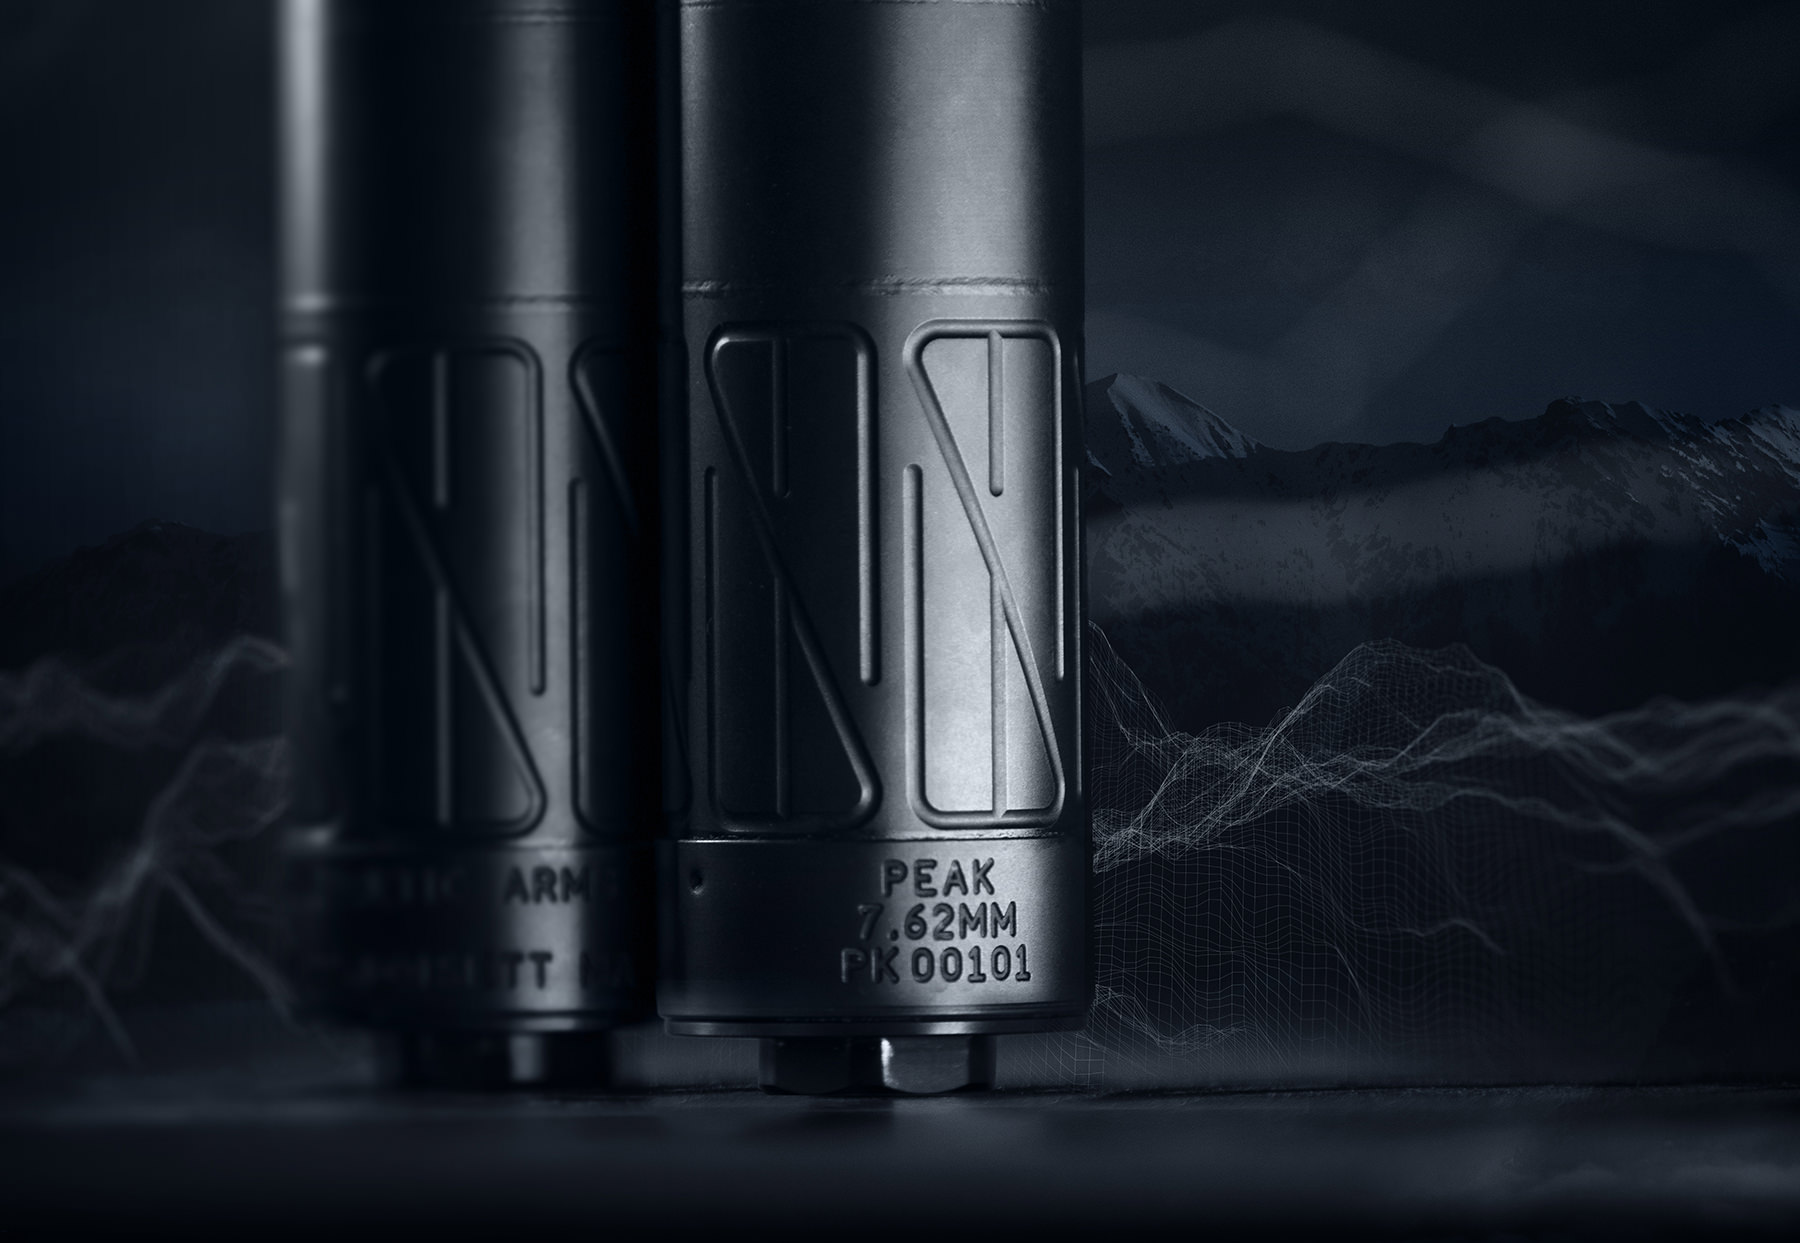 Energetic Armament Launches PEAK Line with Flagship PEAK 30 7.62mm Rifle Suppressor